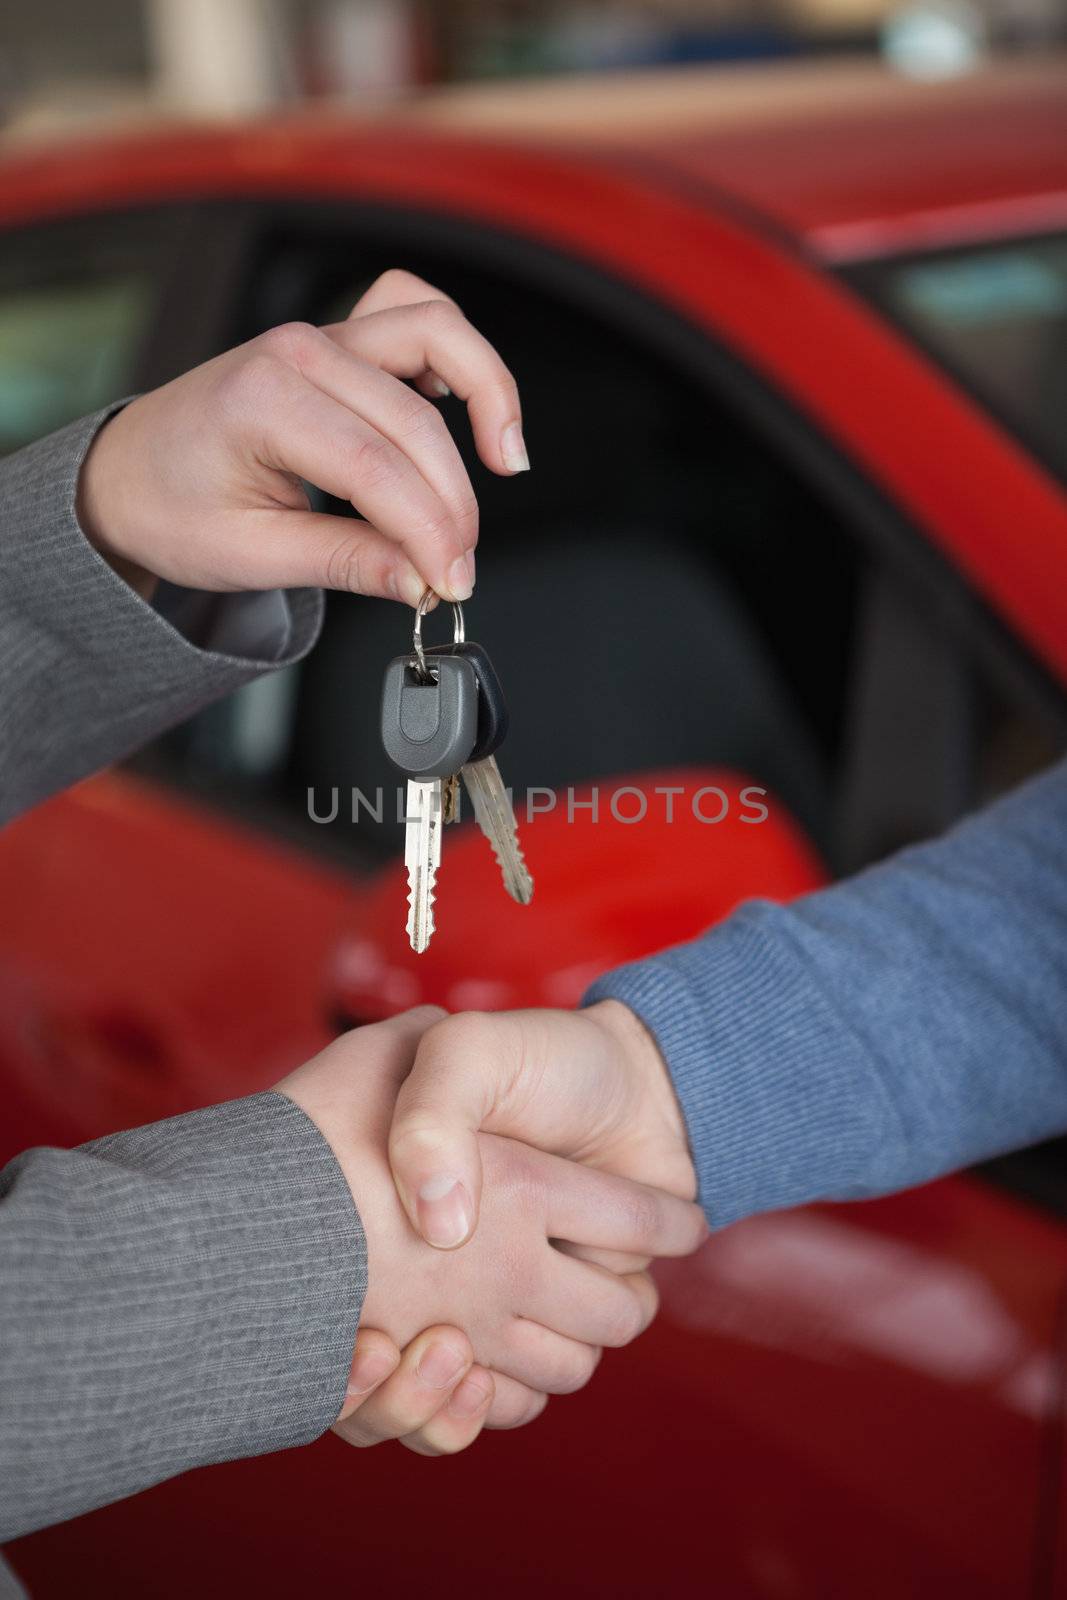 People shaking hands while holding keys by Wavebreakmedia